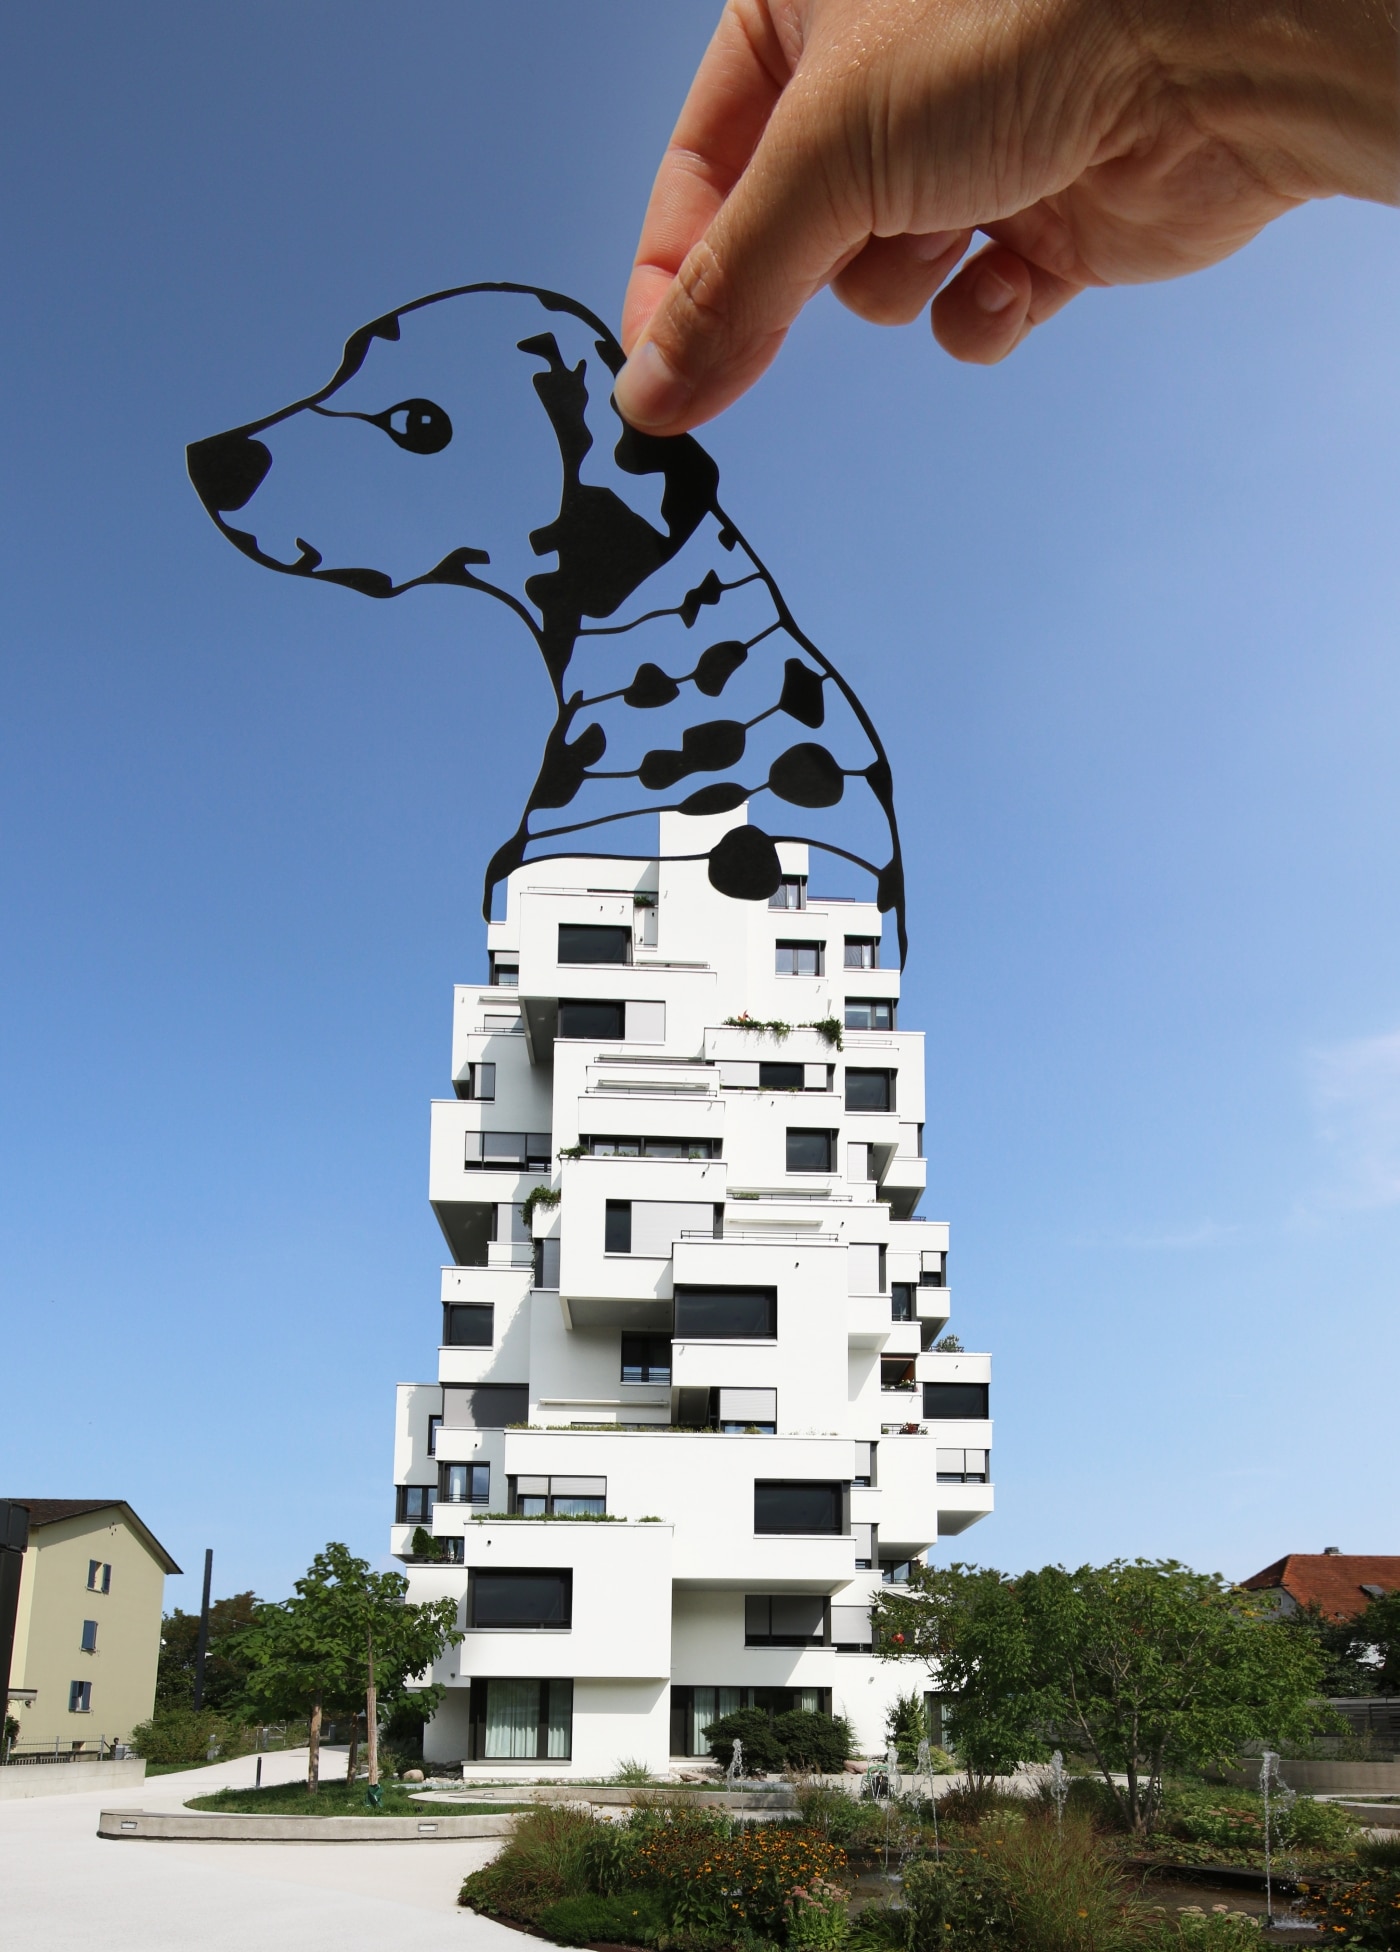 Paper Cutting Art by Paperboyo Rich McCor